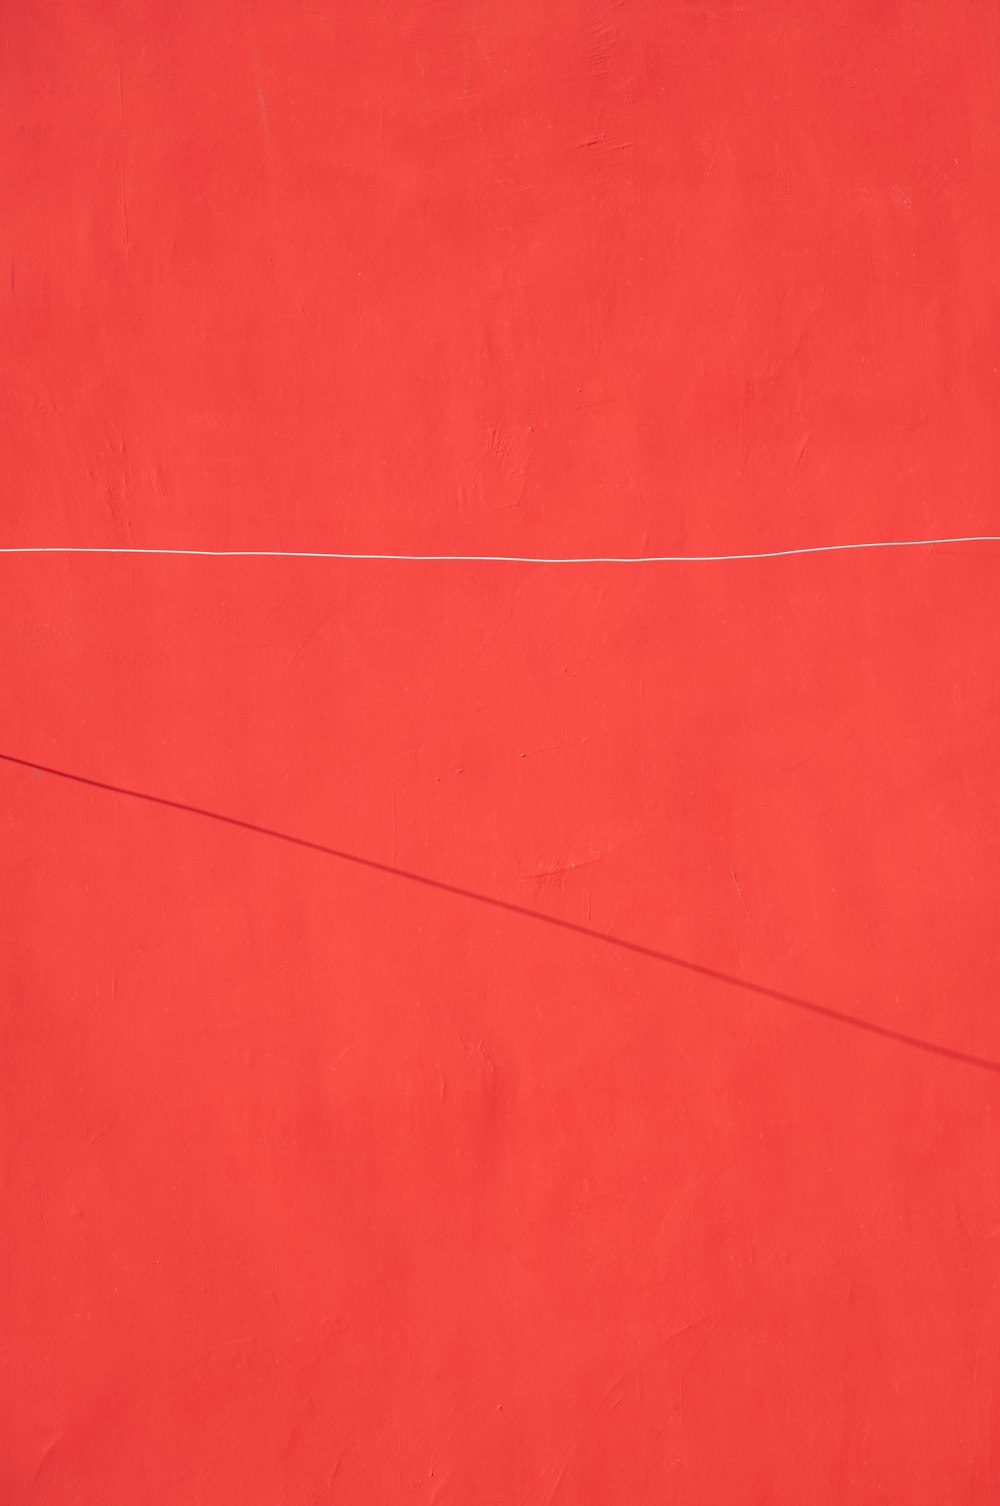 a red wall with a white line on it